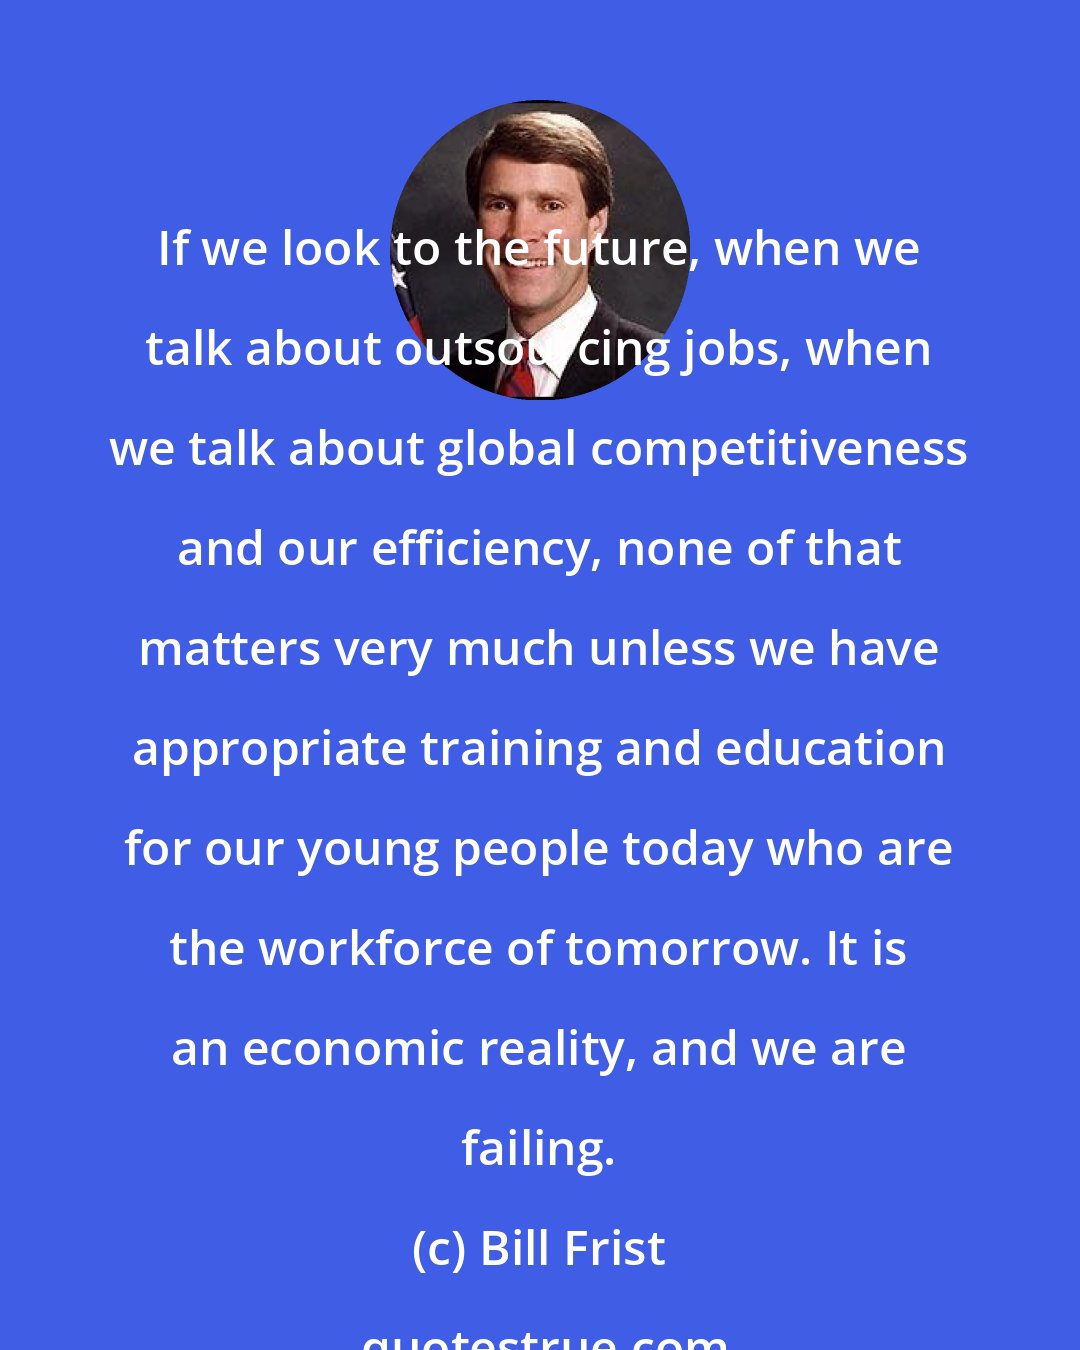 Bill Frist: If we look to the future, when we talk about outsourcing jobs, when we talk about global competitiveness and our efficiency, none of that matters very much unless we have appropriate training and education for our young people today who are the workforce of tomorrow. It is an economic reality, and we are failing.